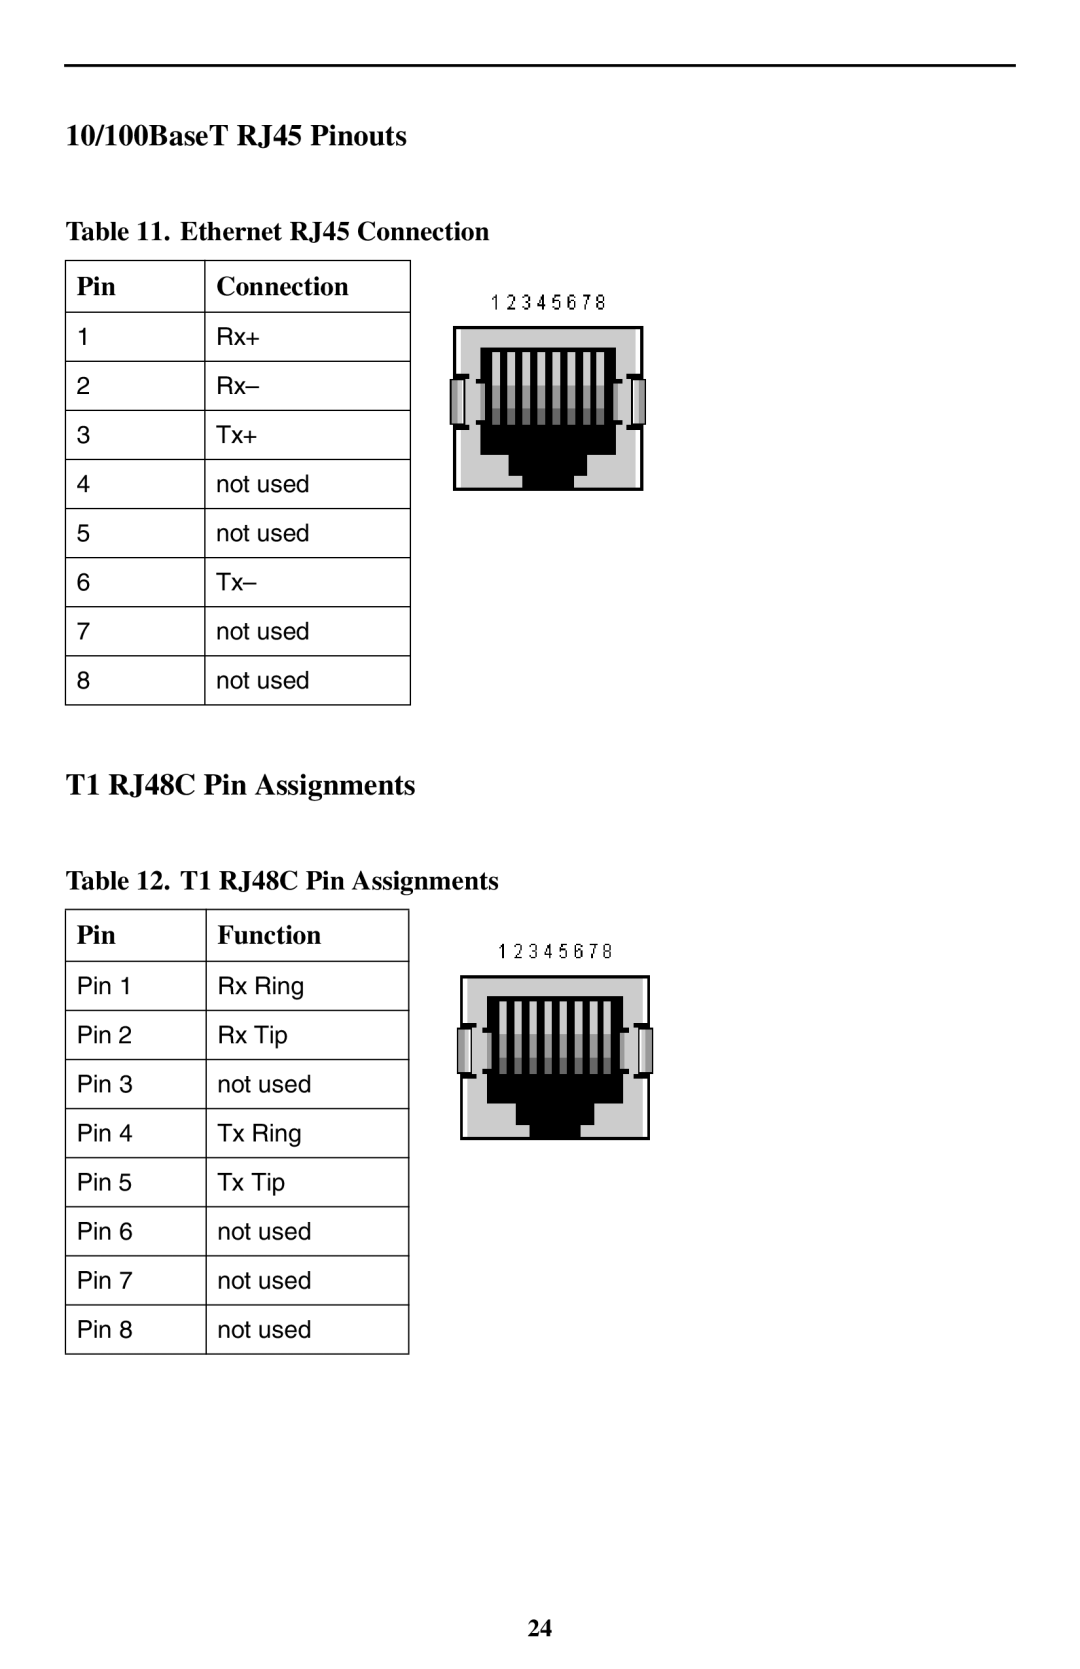 Paradyne SMD2000-24T 10/100BaseT RJ45 Pinouts, T1 RJ48C Pin Assignments, Ethernet RJ45 Connection Pin 